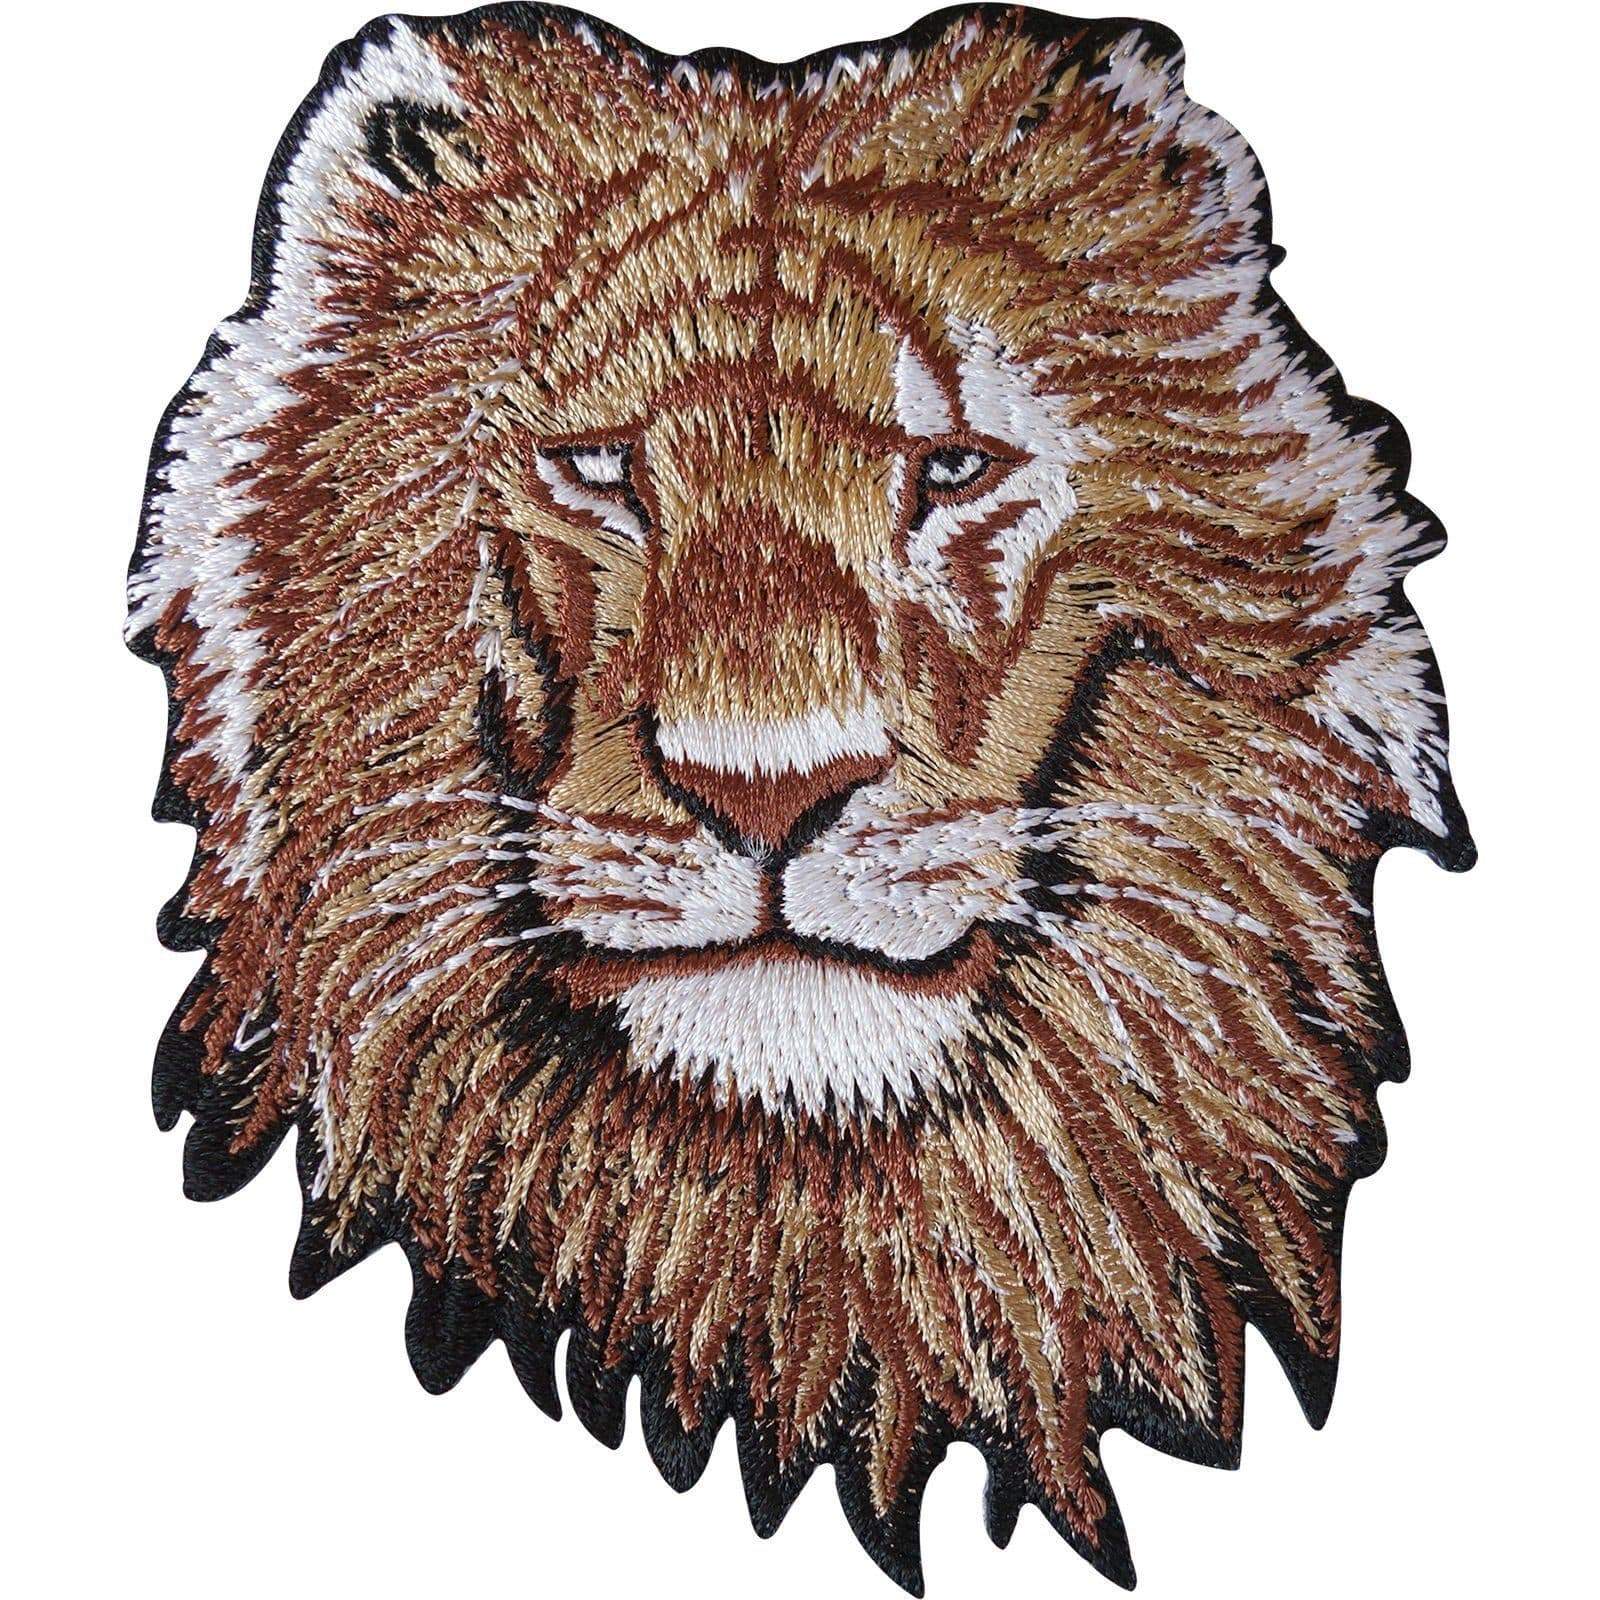 Iron On Lion Patch / Sew On Embroidered Badge for Cloth Jacket Jeans Bag Crafts